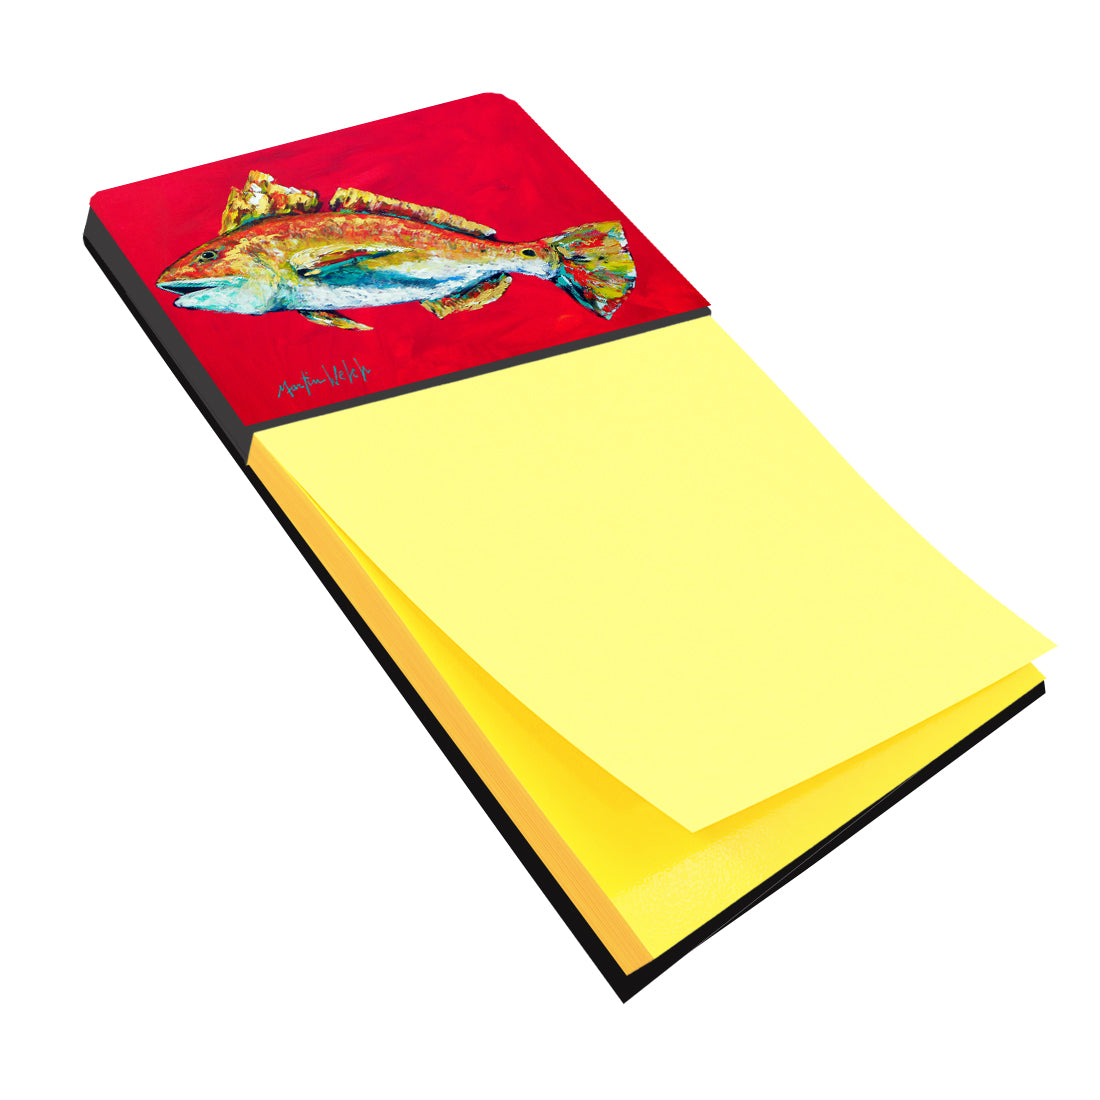 Buy this Fish - Red Fish Woo Hoo Sticky Note Holder